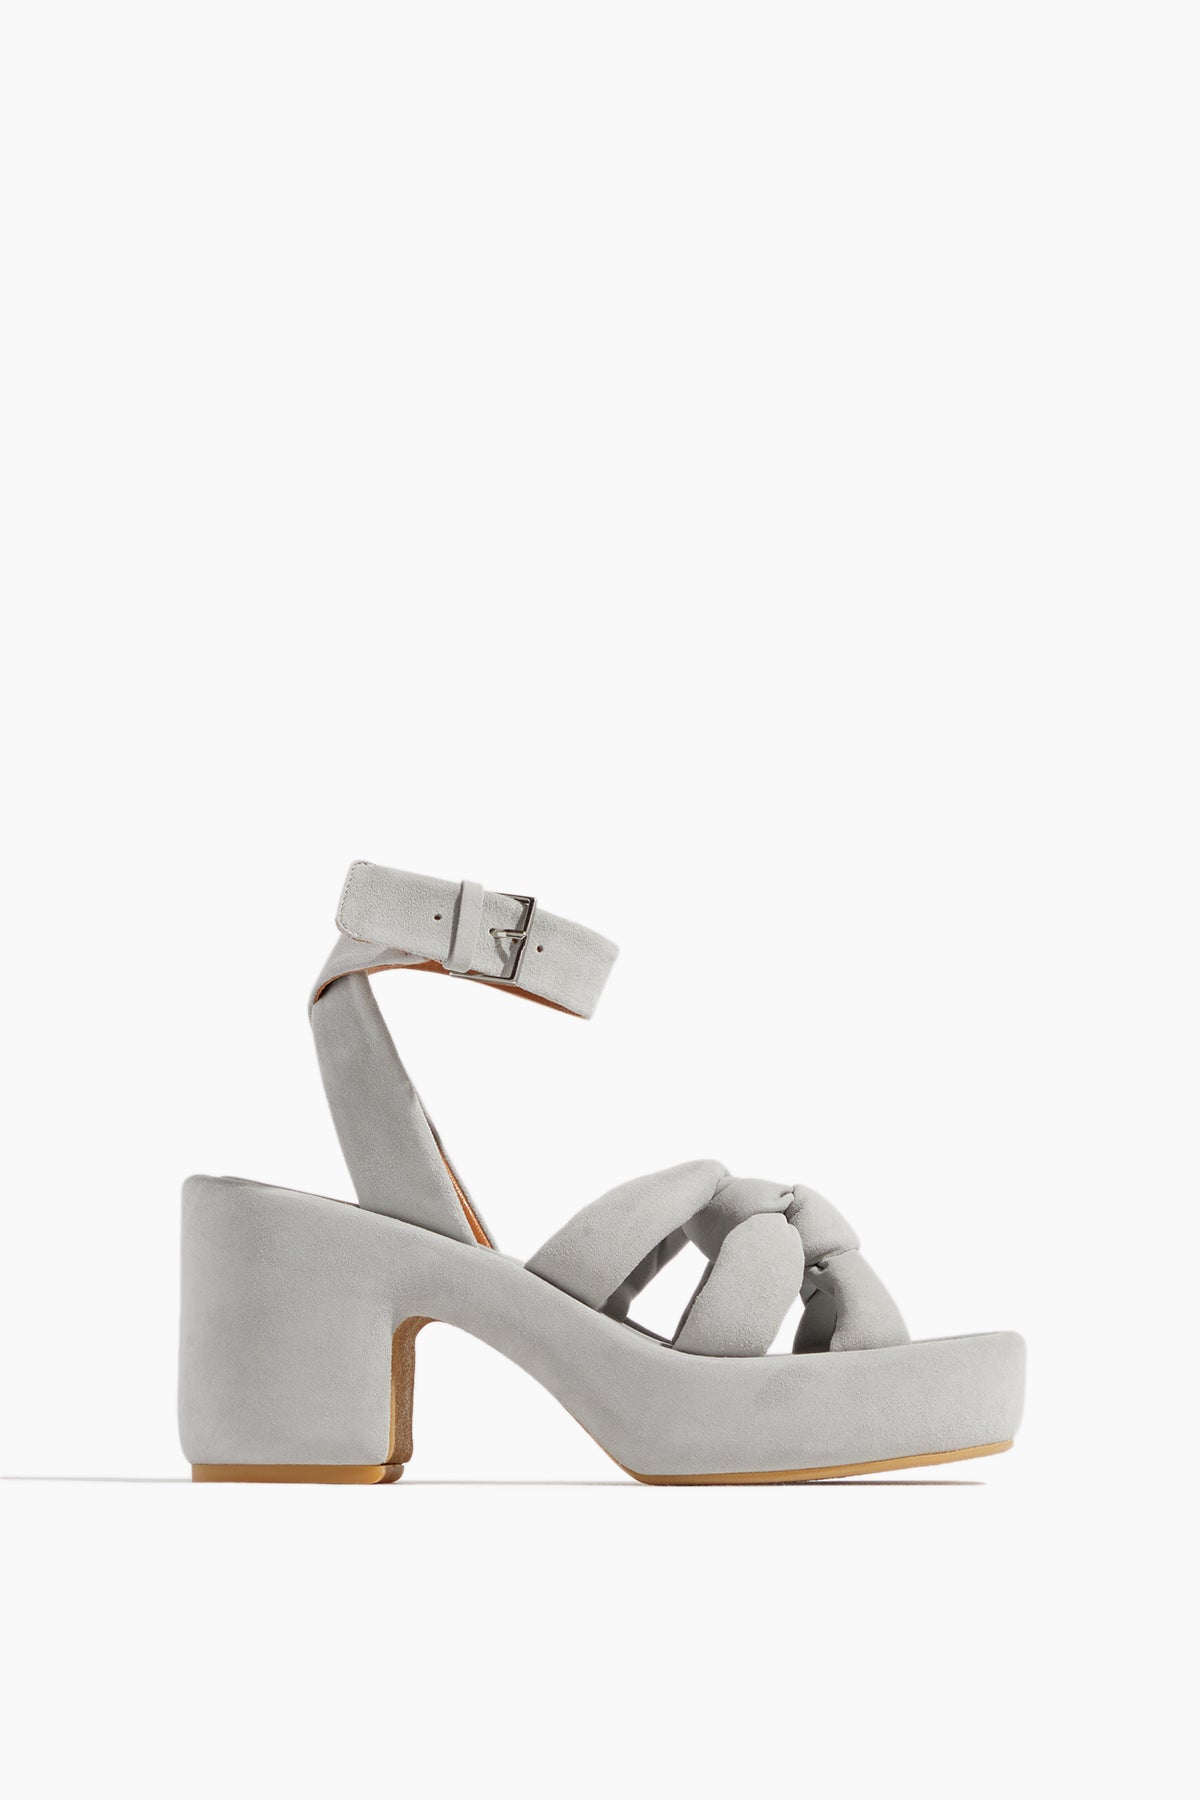 Clergerie Dayna Sandals in Grey - Grey - Size: 37 / 6.5 US